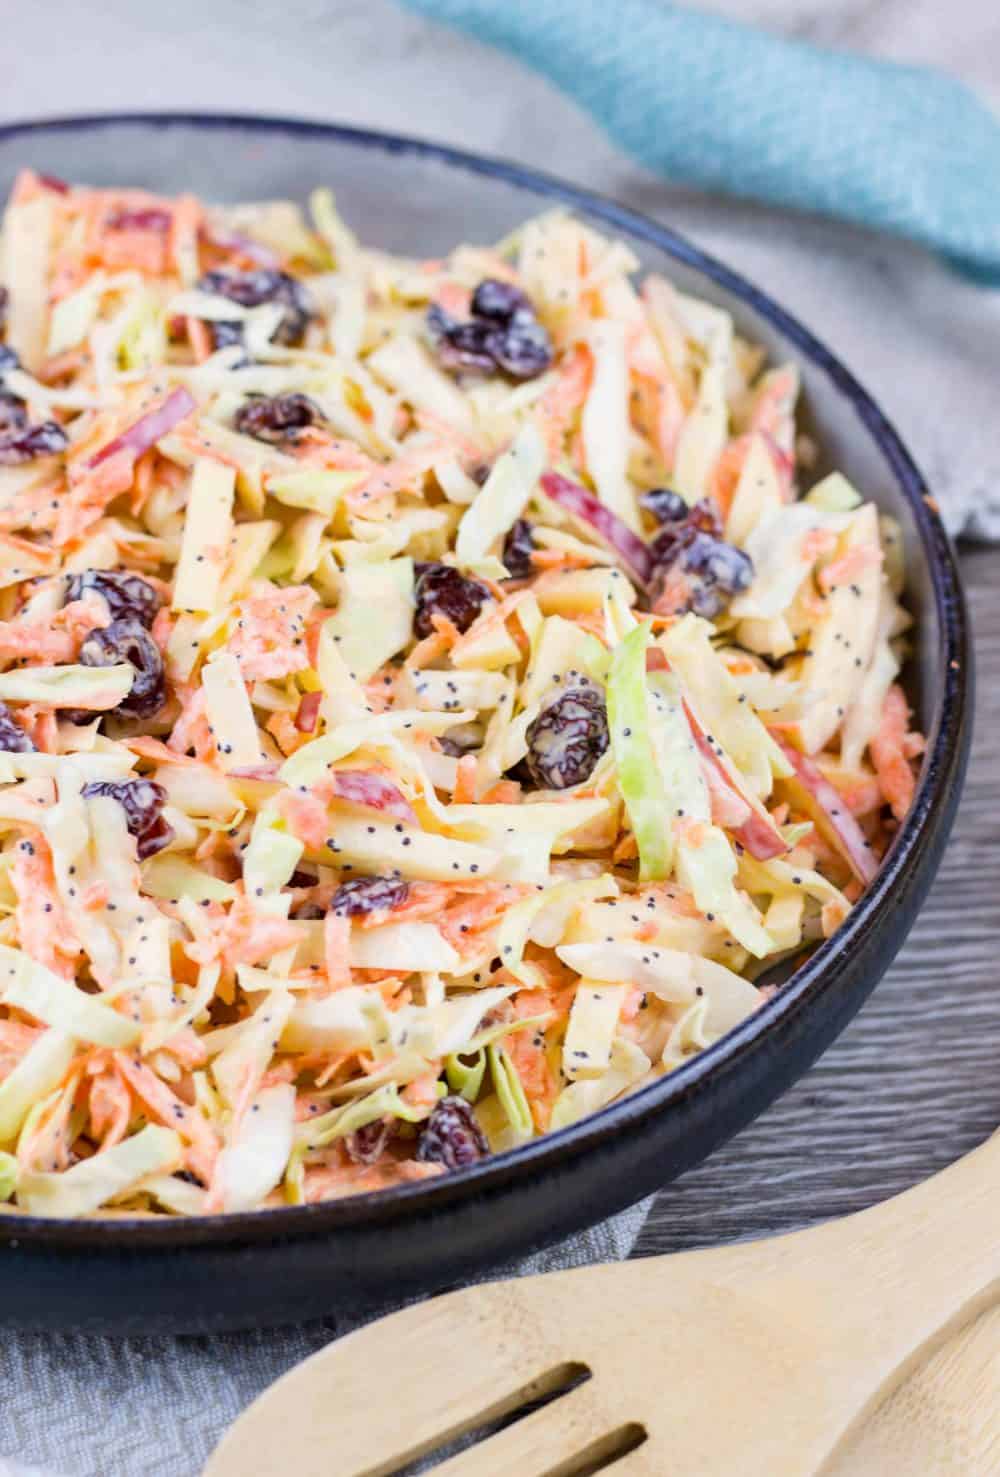 Apple Cranberry Coleslaw salad with creamy Greek yogurt dressing is a perfectly refreshing, crunchy side dish that can be served with just about anything, from pulled pork sandwiches to fried fish, or a nice juicy burger.